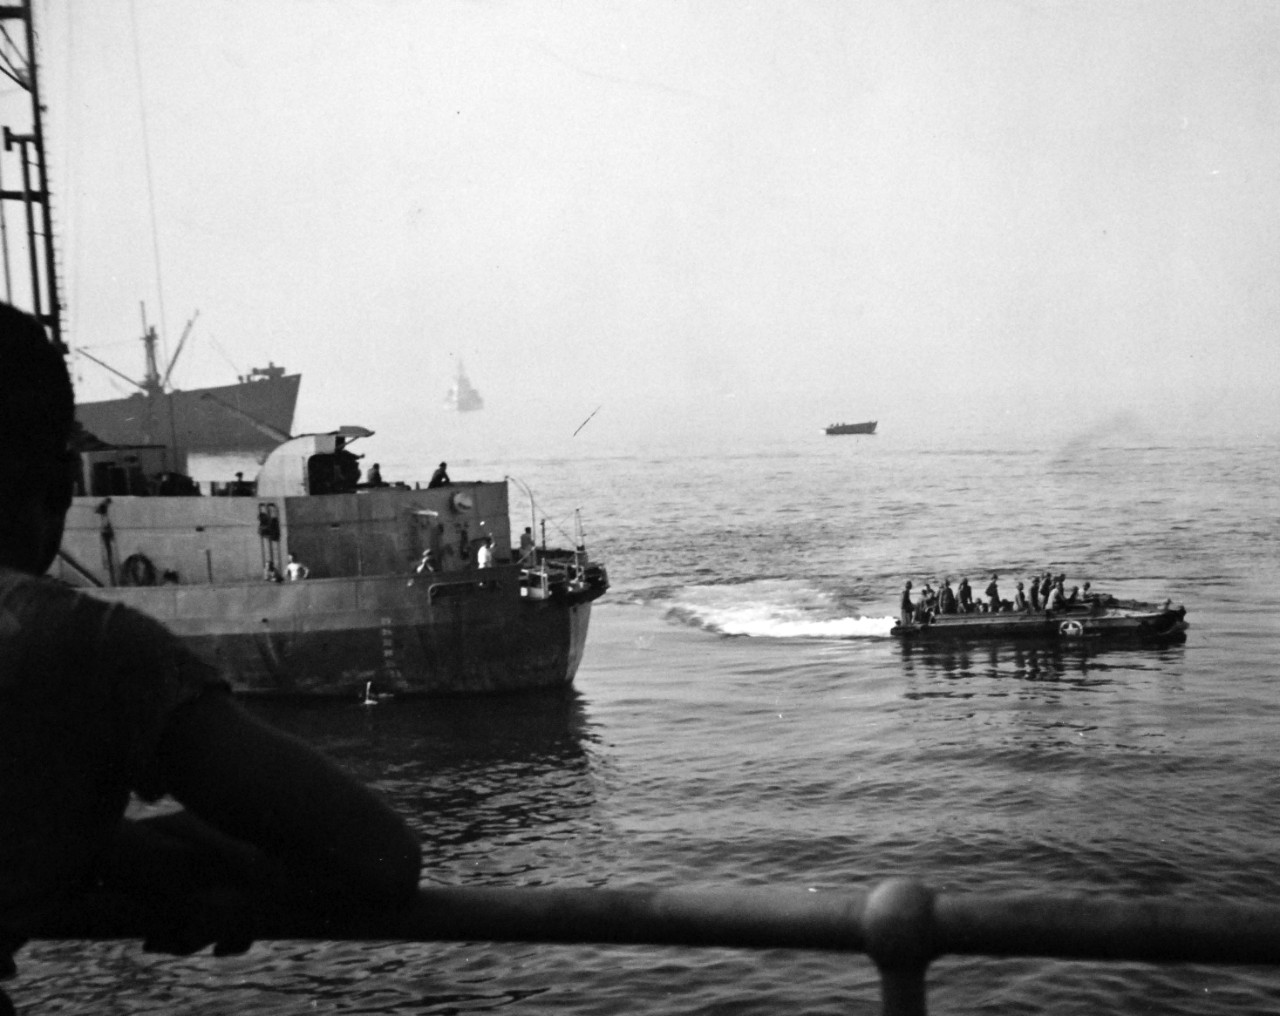 80-G-87331:  Operation Avalanche, September 1943.  Loaded “Duck” passes USS Ancon (AGC 4) on way to beach on D-Day at Salerno, Italy.  Photograph released September 12, 1943.   U.S. Navy photograph, now in the collections of the National Archives.  (2017/04/04).